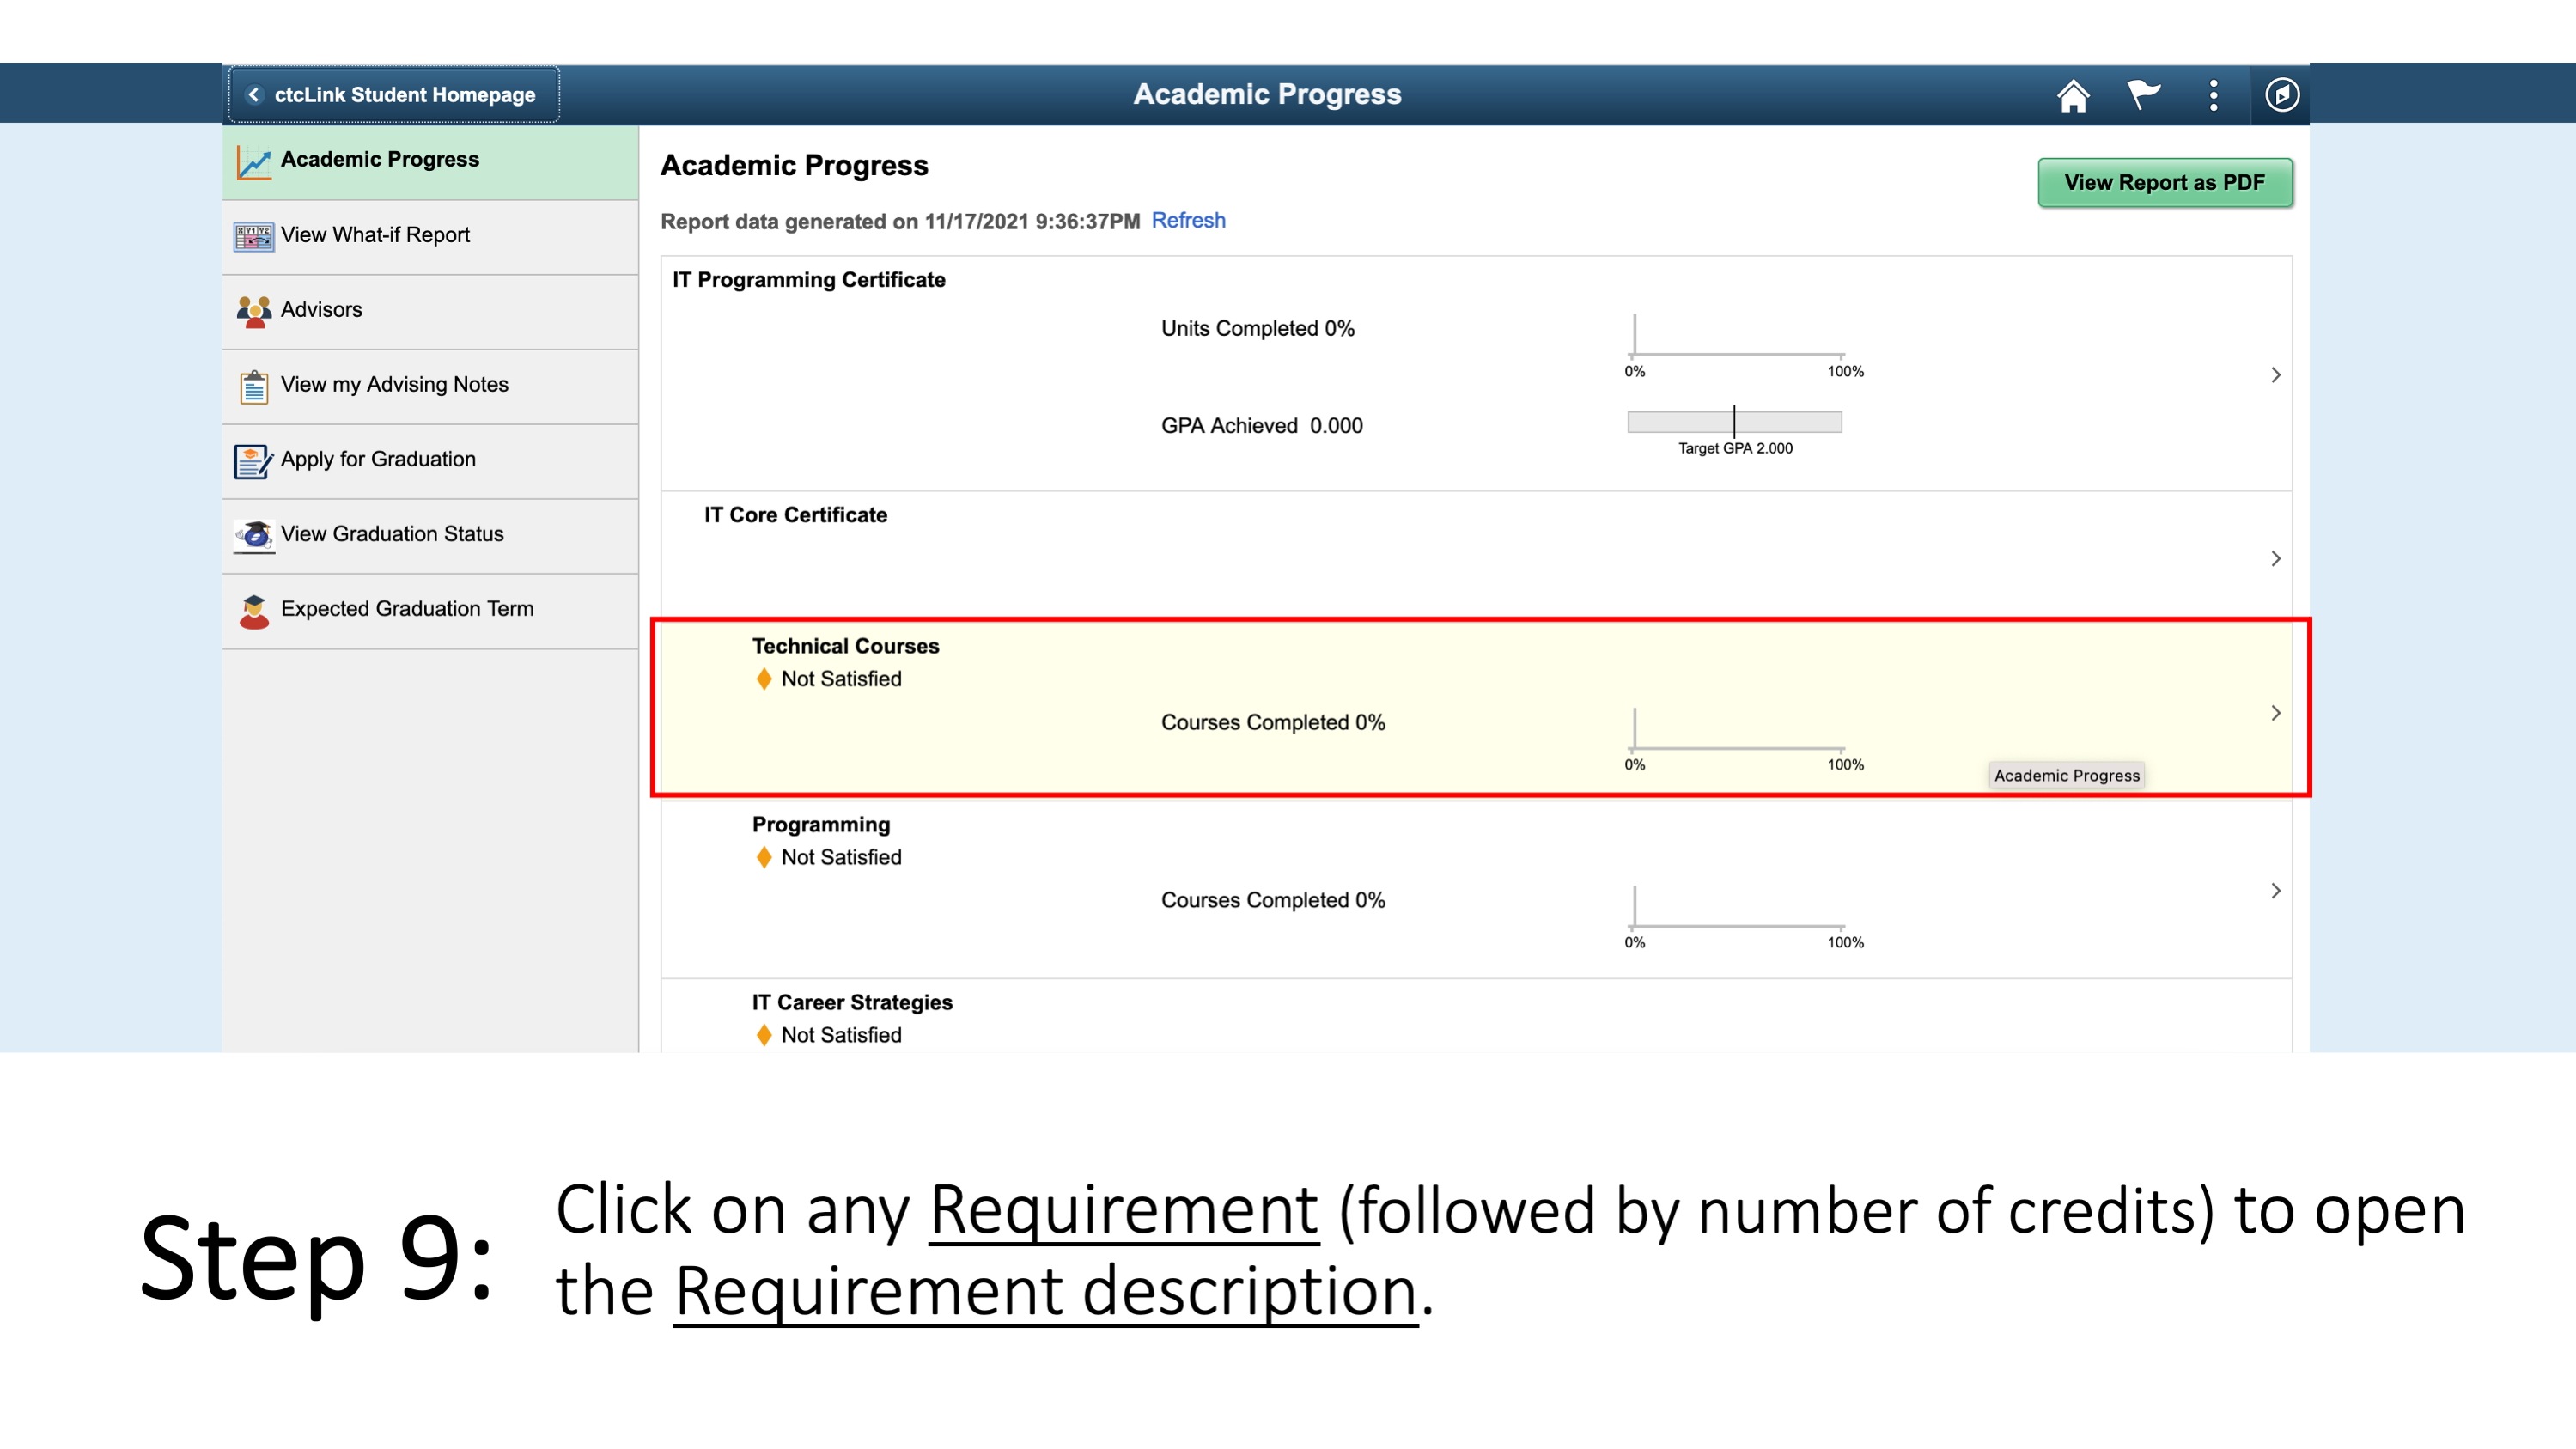 Step 9: Click on any Requirement (followed by number of credits) to open the Requirement description. 